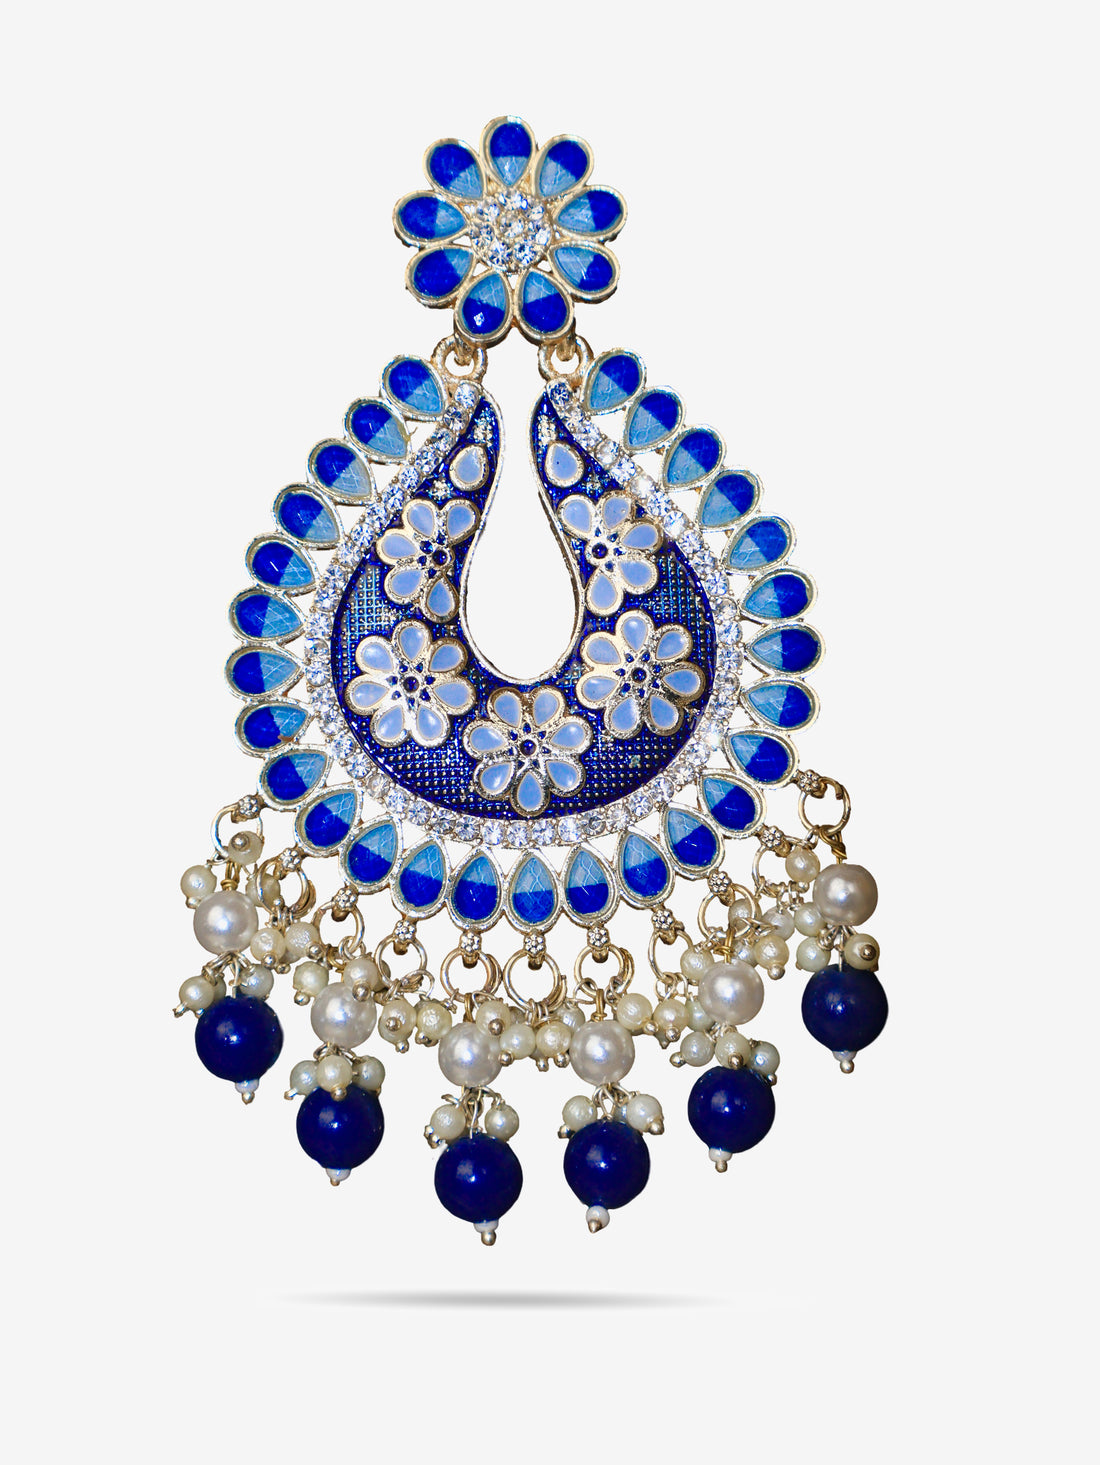 Jewels Chandbali Earrings for Women with Kundan Stones and Beads by Shreekama Navy Blue Fashion Jewelry for Party Festival Wedding Occasion in Noida